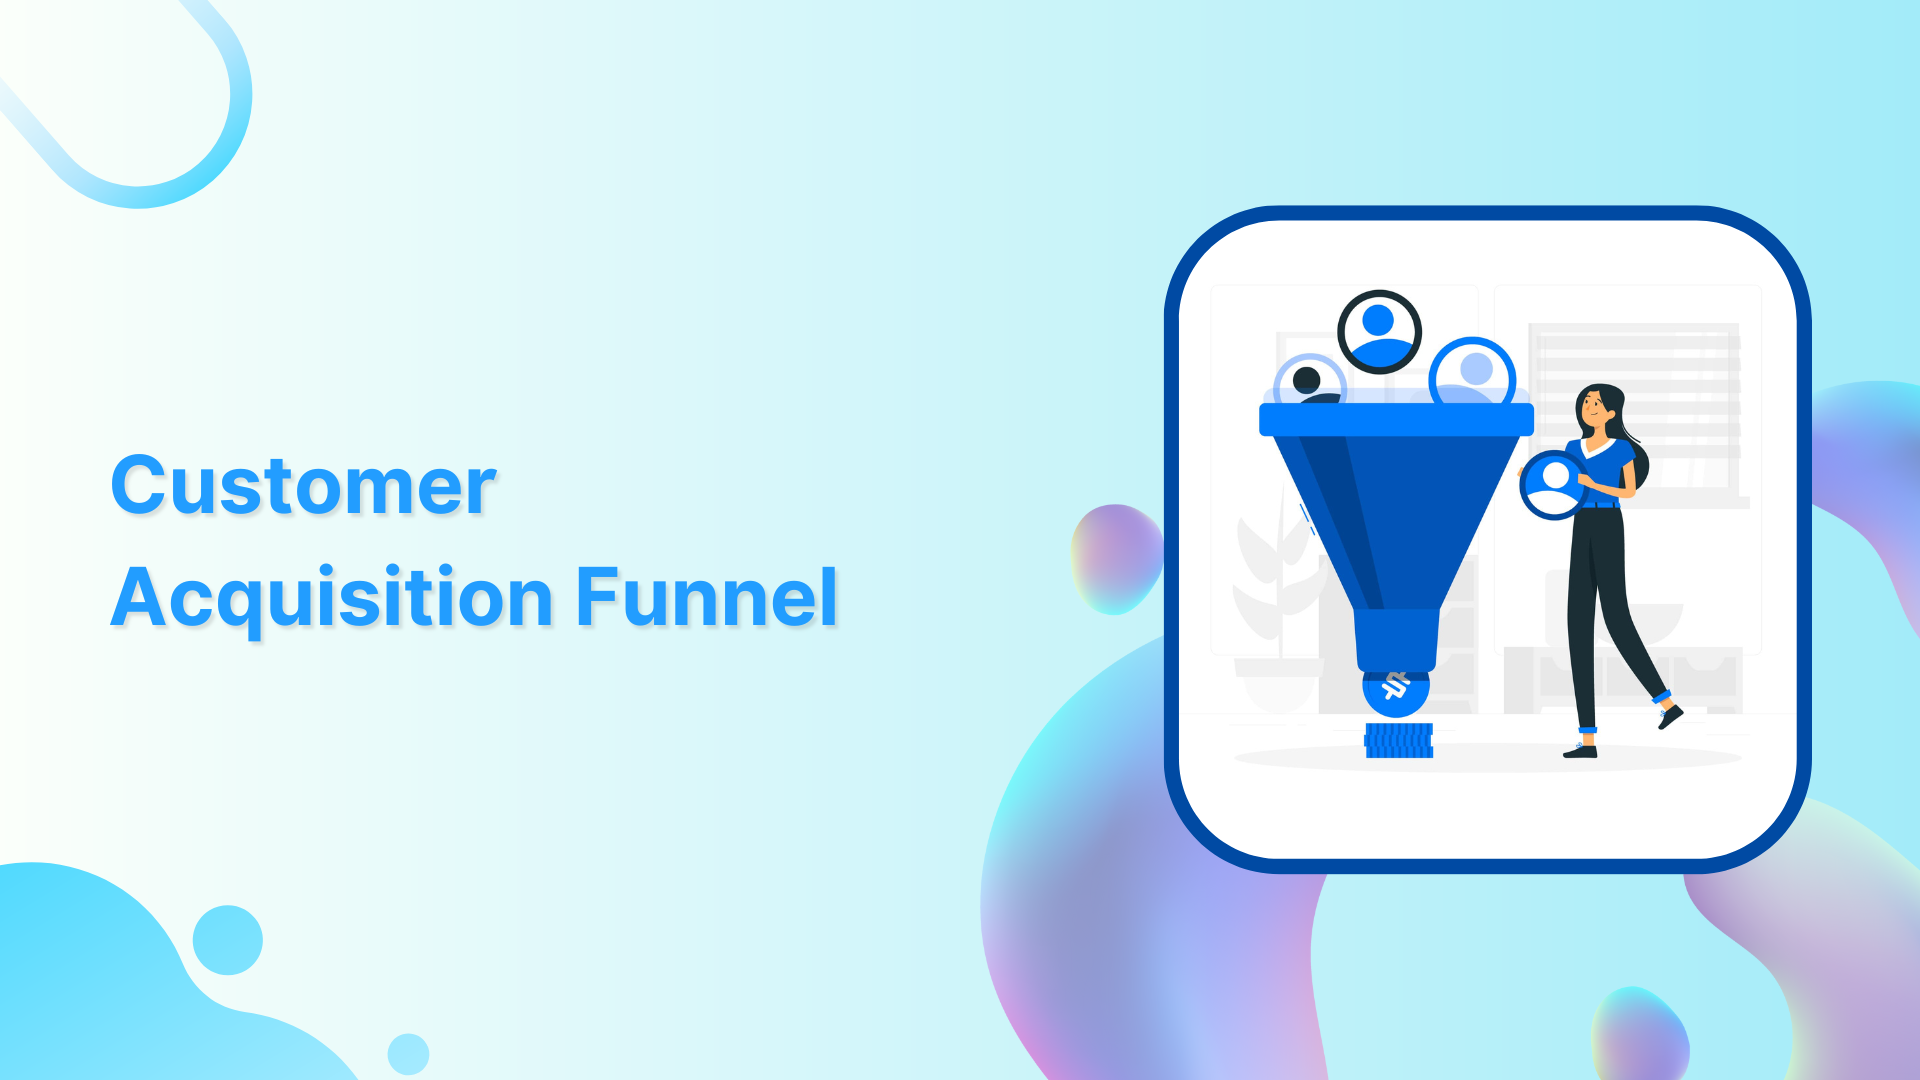 A 360 Guide on Building a Customer Acquisition Funnel